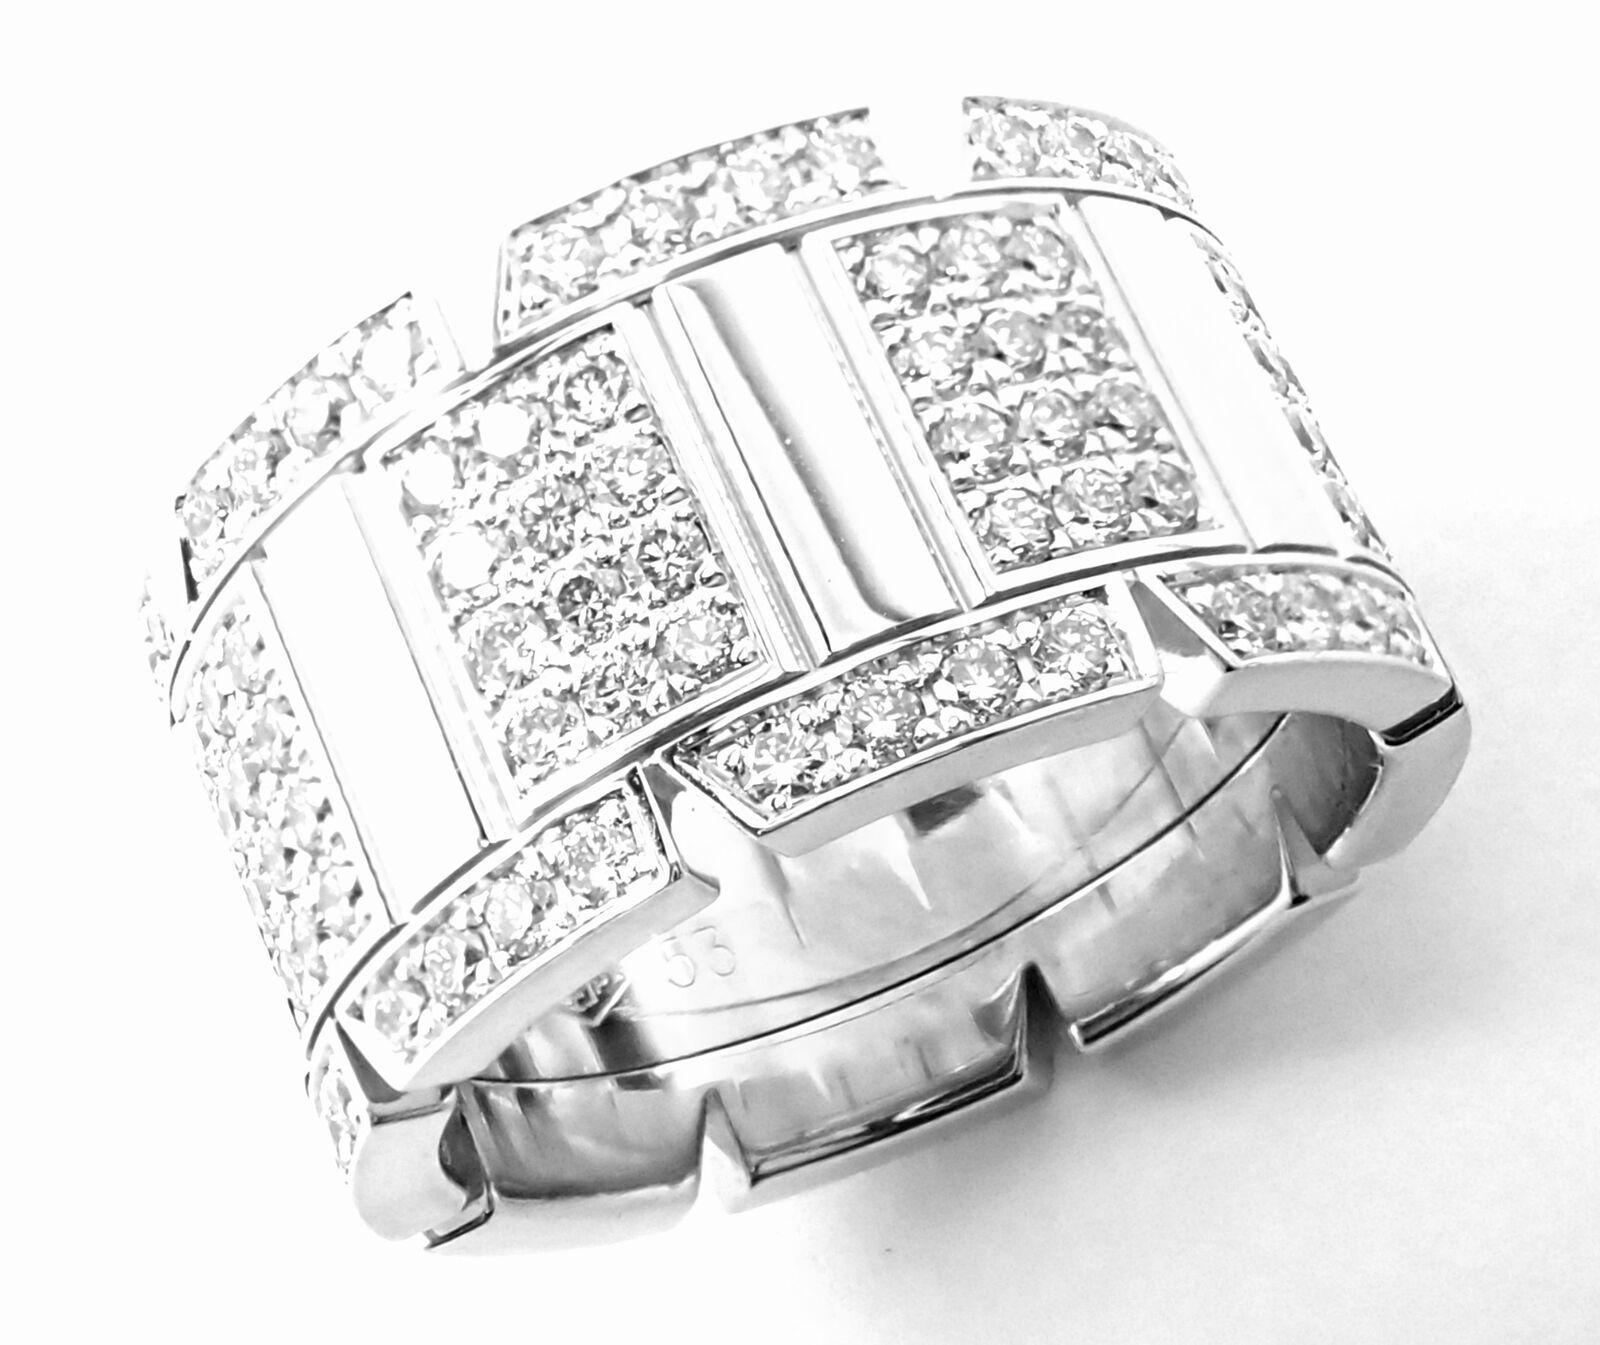 CARTIER Large Model Tank Francaise Diamond White Gold Band Ring In Excellent Condition For Sale In Holland, PA